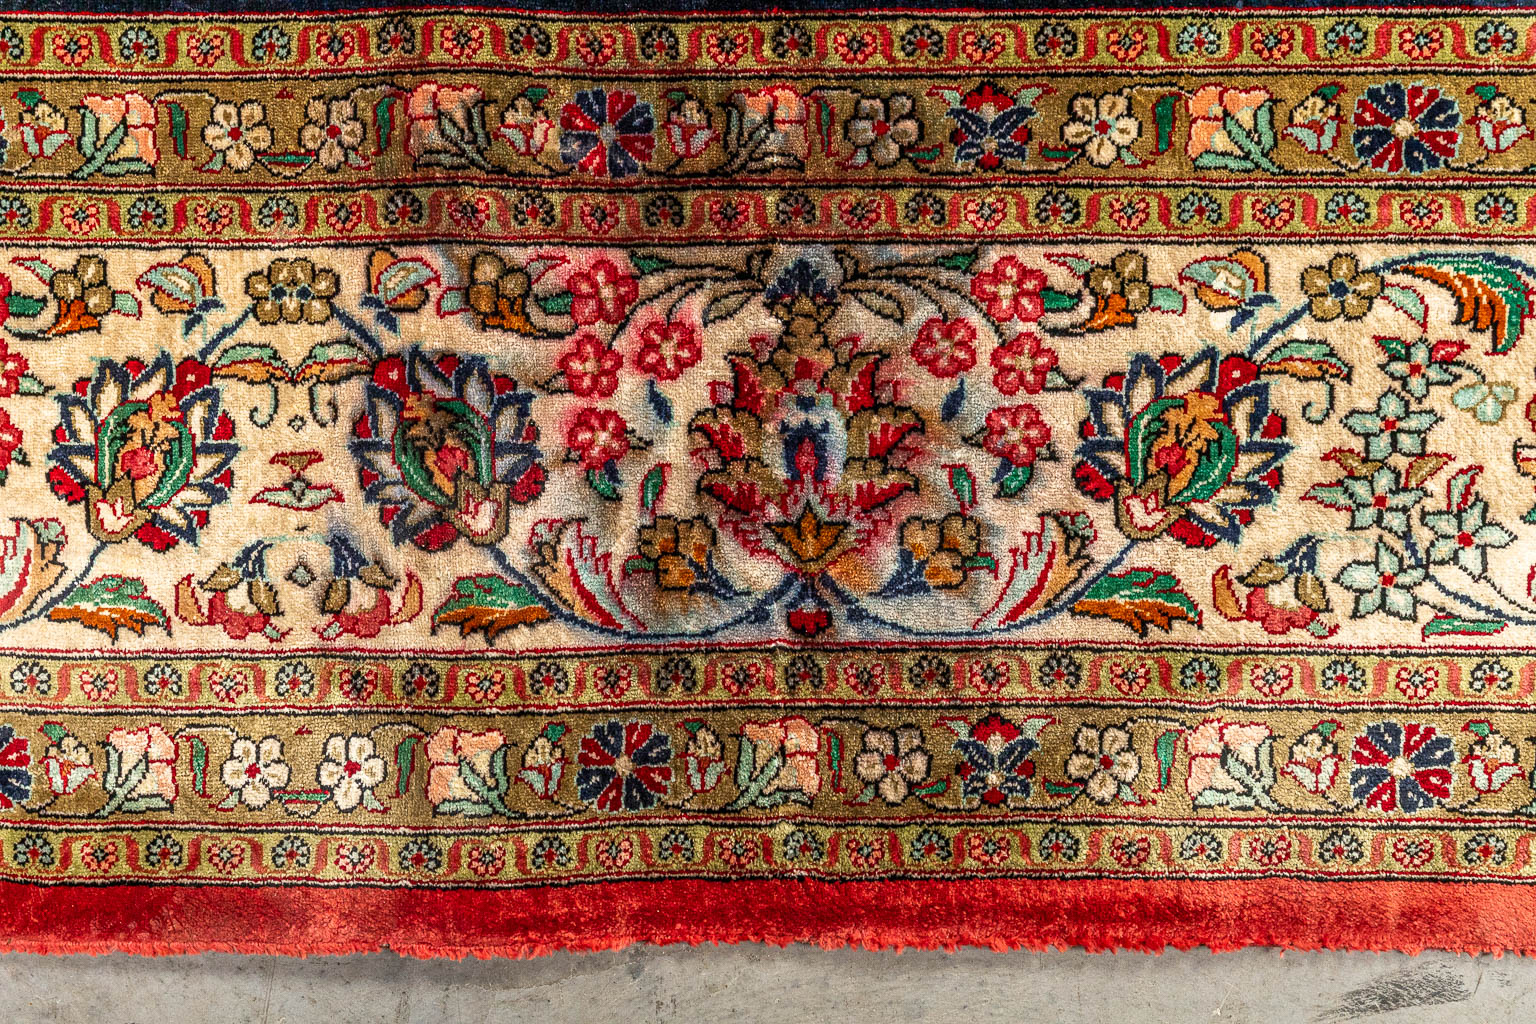 An Oriental hand-made carpet made of silk, decorated with birds and flowers. Keshan. (200 x 310 cm)